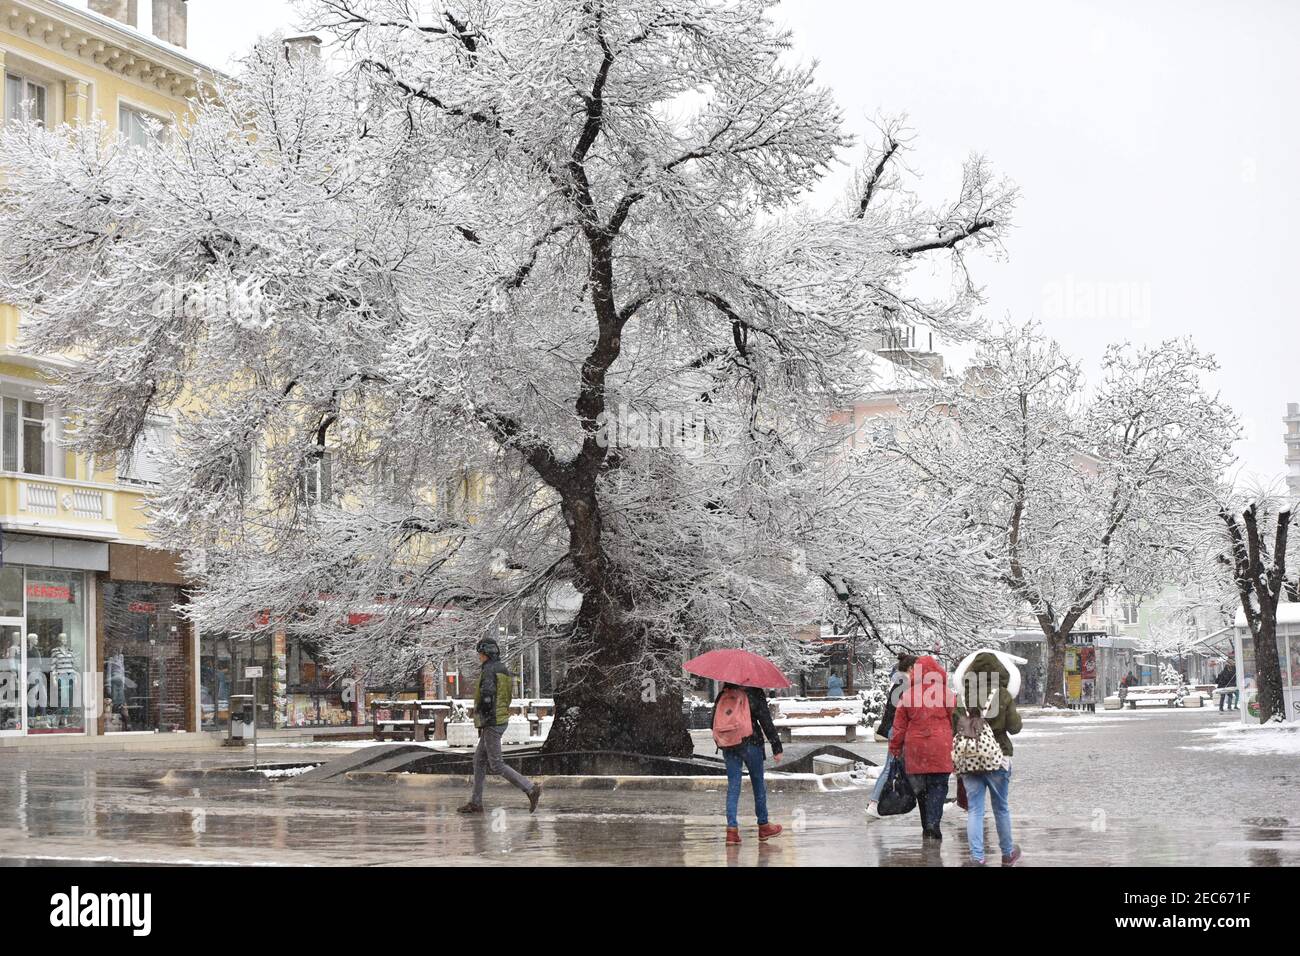 Sliven, Bulgaria - March 22nd 2018: The Old Elm Tree (Bulgarian: 'Stariyat Bryast') in the high street covered in snow Stock Photo